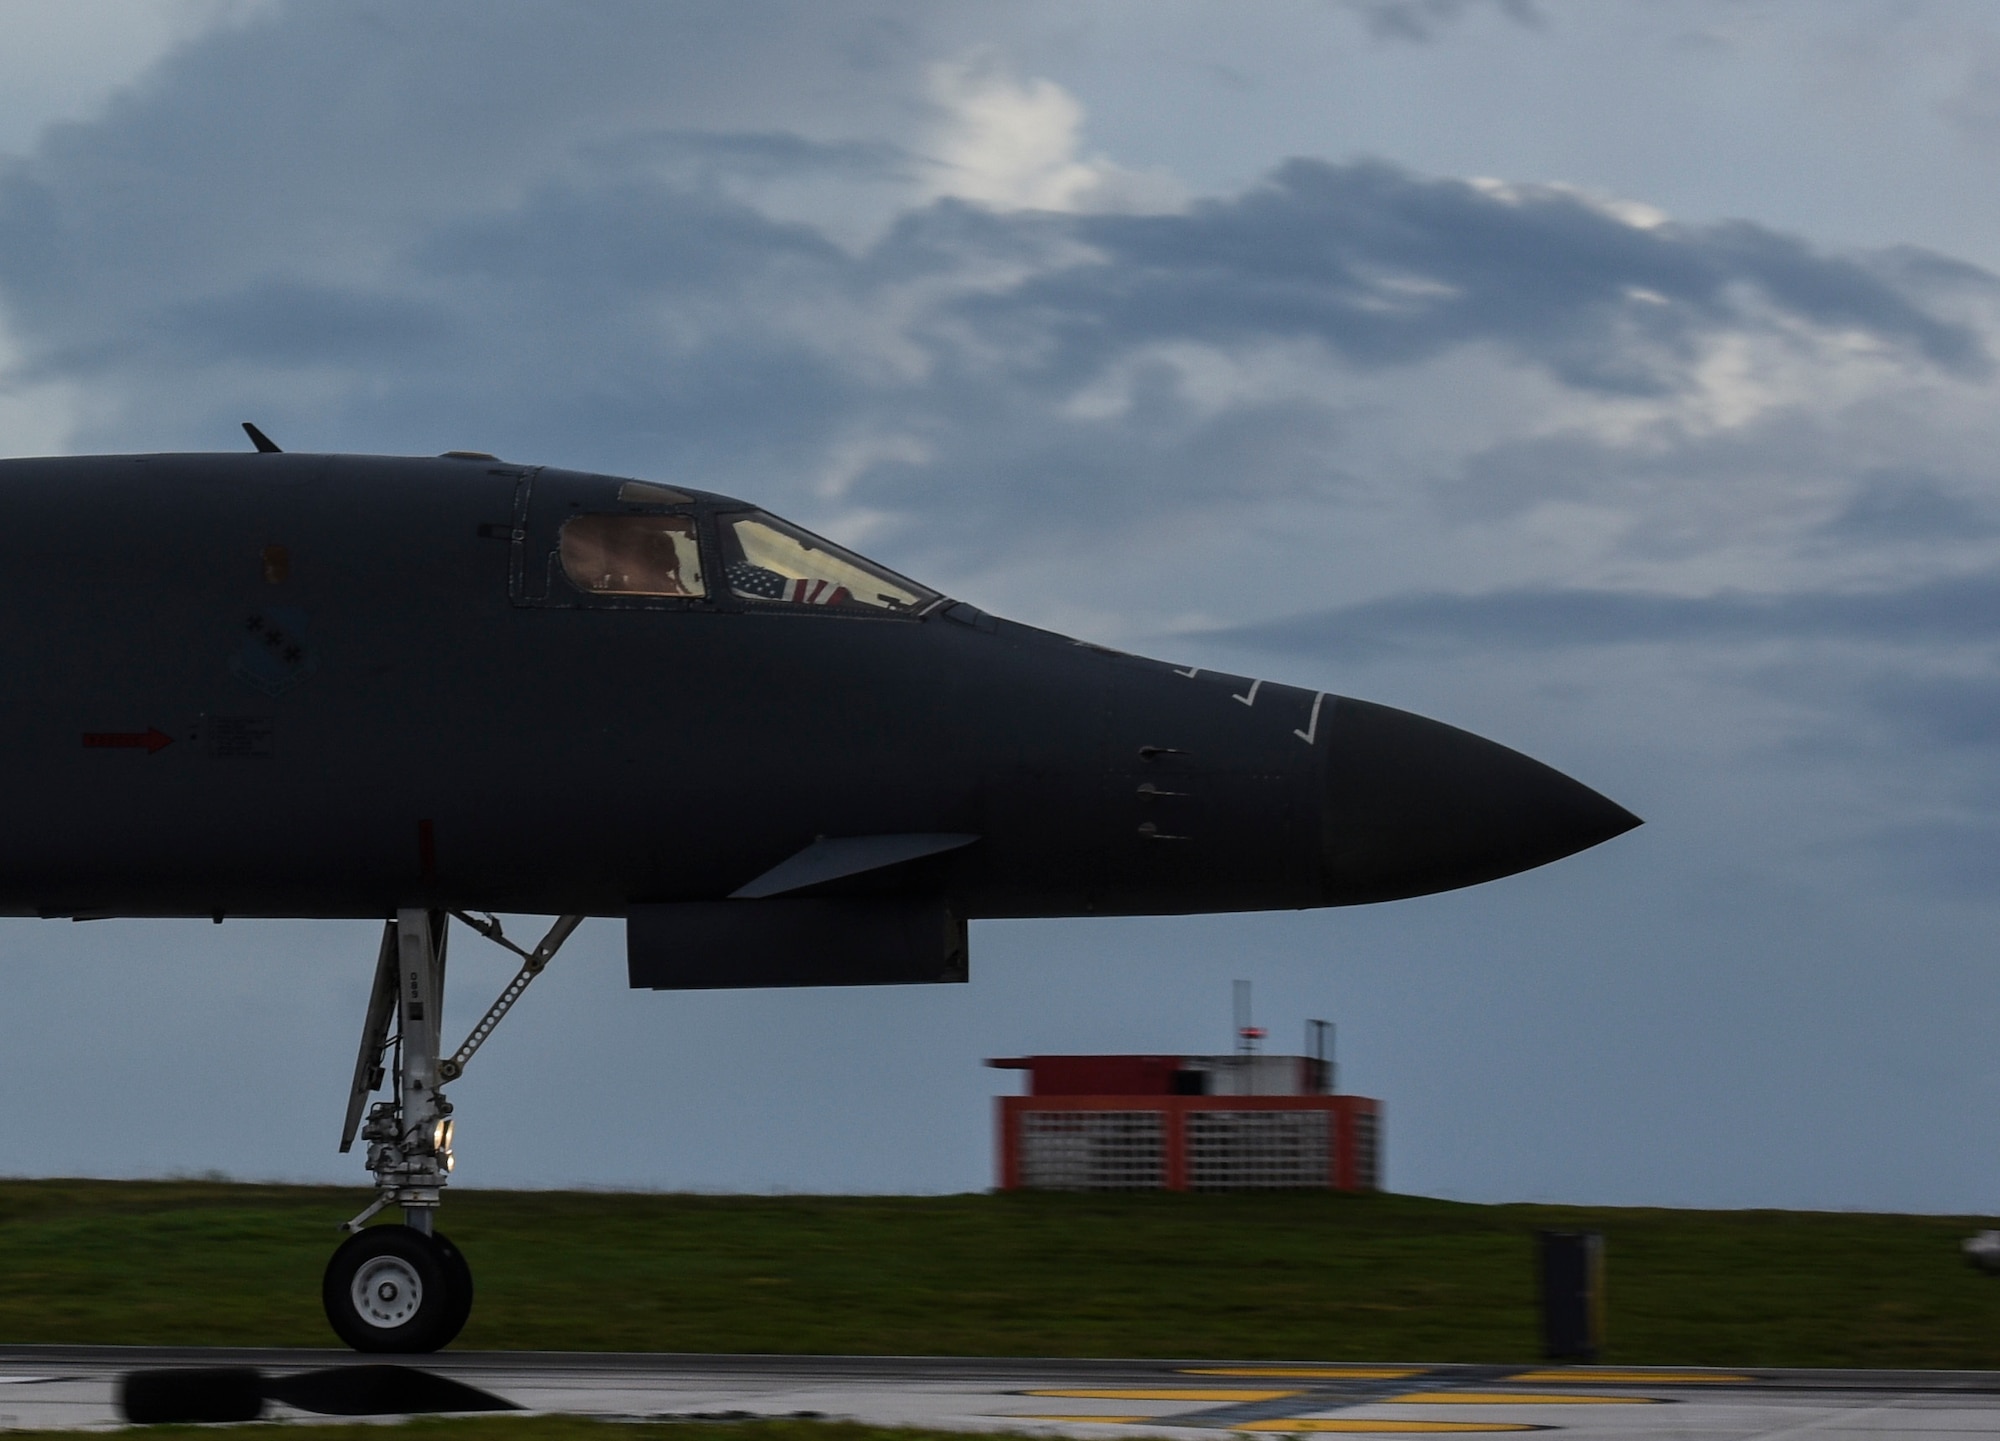 A U.S. Air Force B-1B Lancer aircraft assigned to the 9th Expeditionary Bomb Squadron, deployed from Dyess Air Force Base, Texas, takes off from Andersen Air Force Base, Guam, for a 10-hour mission, flying in the vicinity of Kyushu, Japan, the East China Sea, and the Korean peninsula, June 20, 2017. The normal/routine employment of continuous bomber presence (CBP) missions in the U.S. Pacific Command’s area of responsibility since March 2004 are in accordance with international law & are vital to the principles that are the foundation of the rules-based global operating system.  (U.S. Air Force photo/Tech. Sgt. Richard P. Ebensberger)